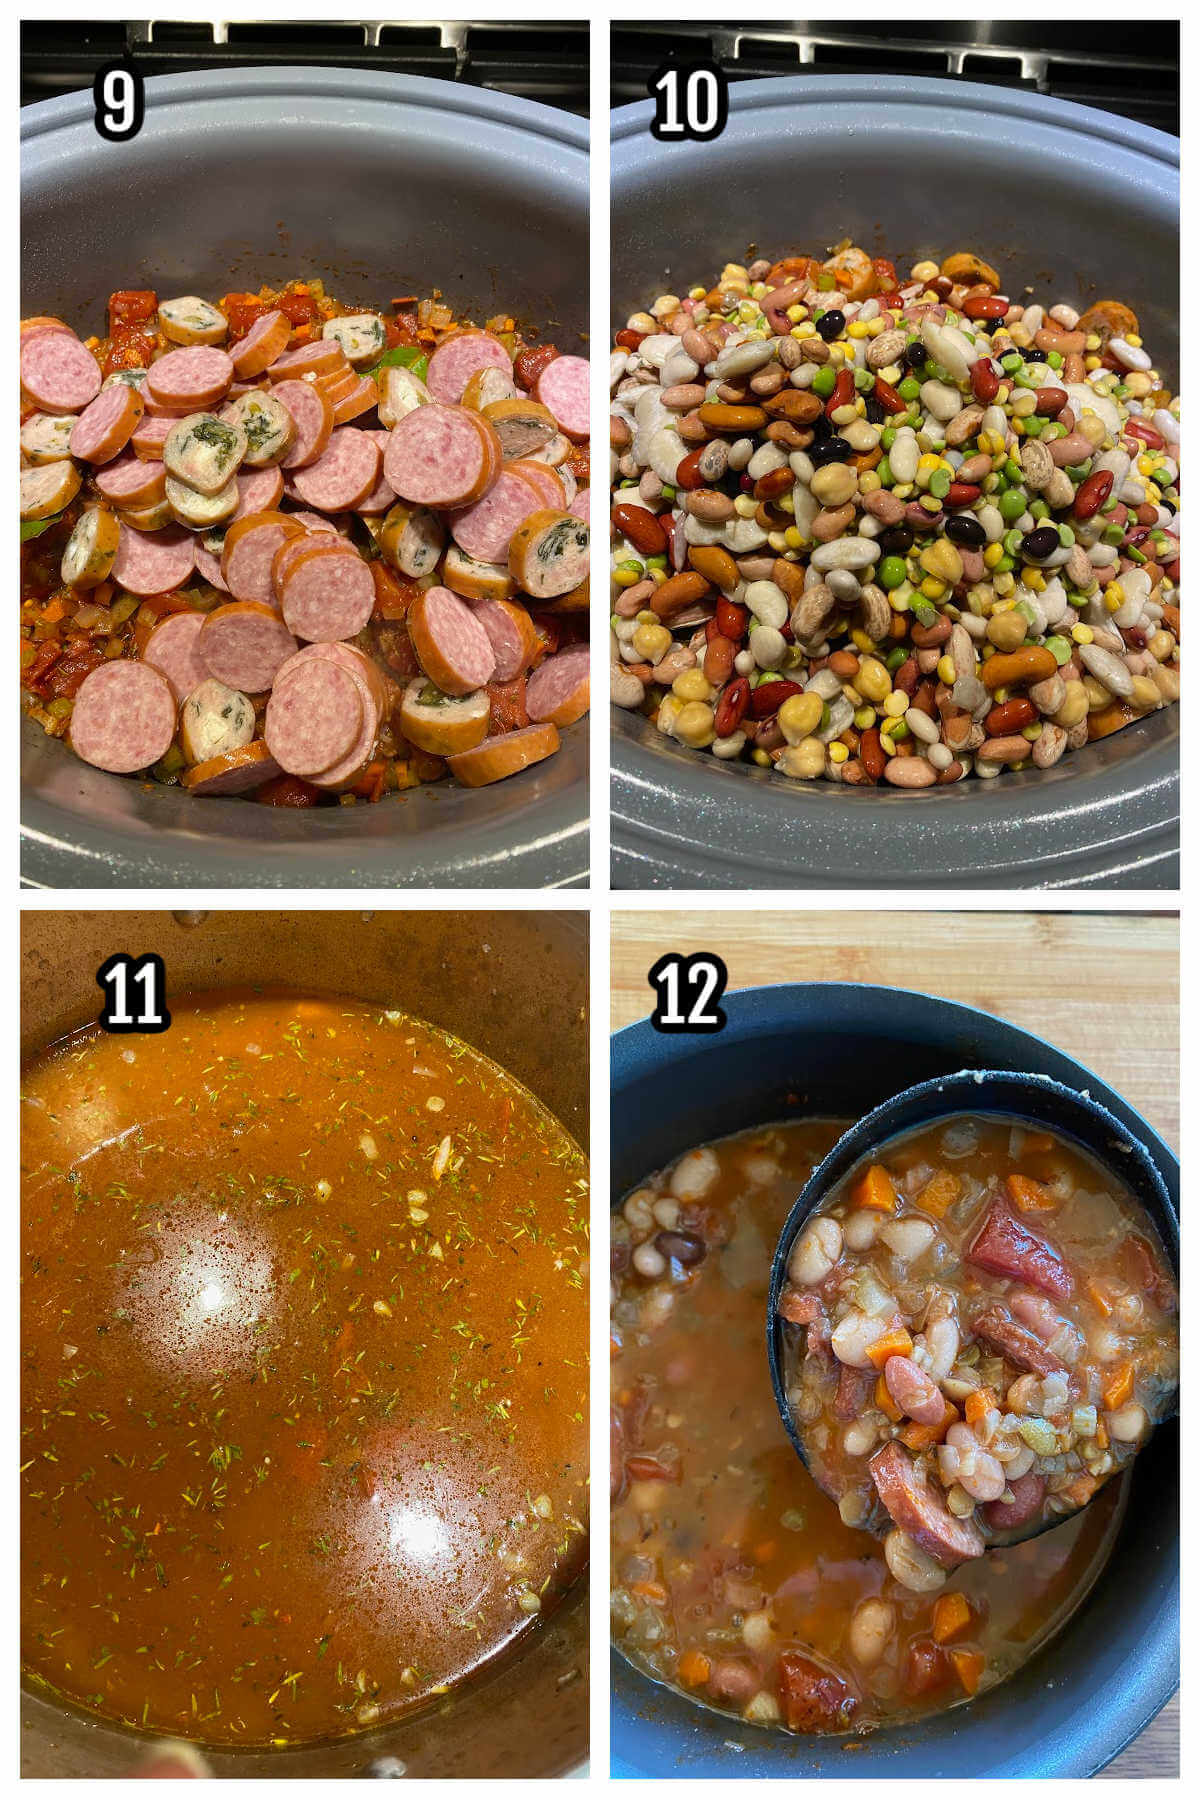 Third and final four steps to making the 15 beans soup recipe. 